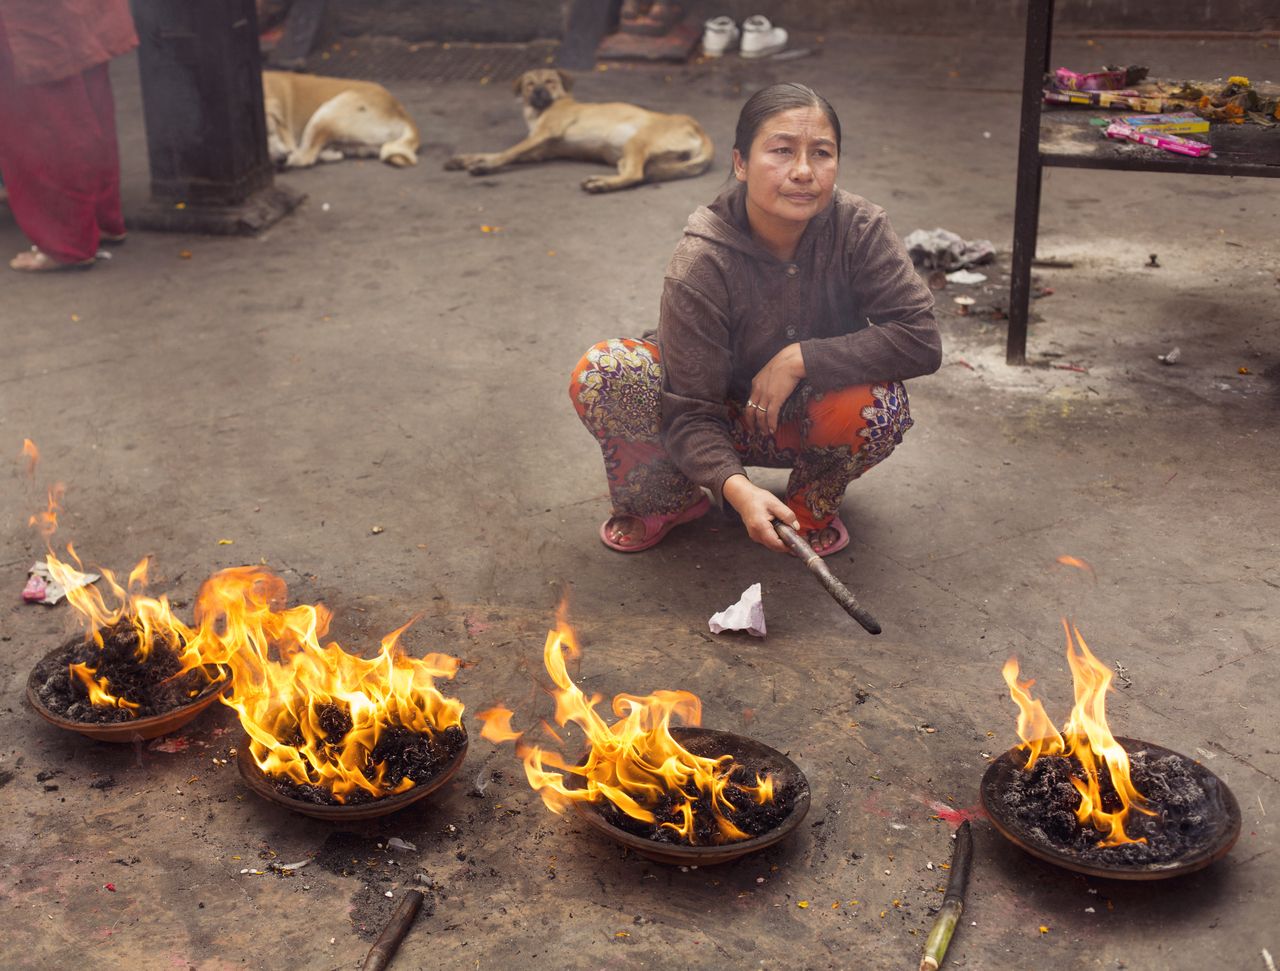 Traditional Ceremony in a Temple in Kathmandu